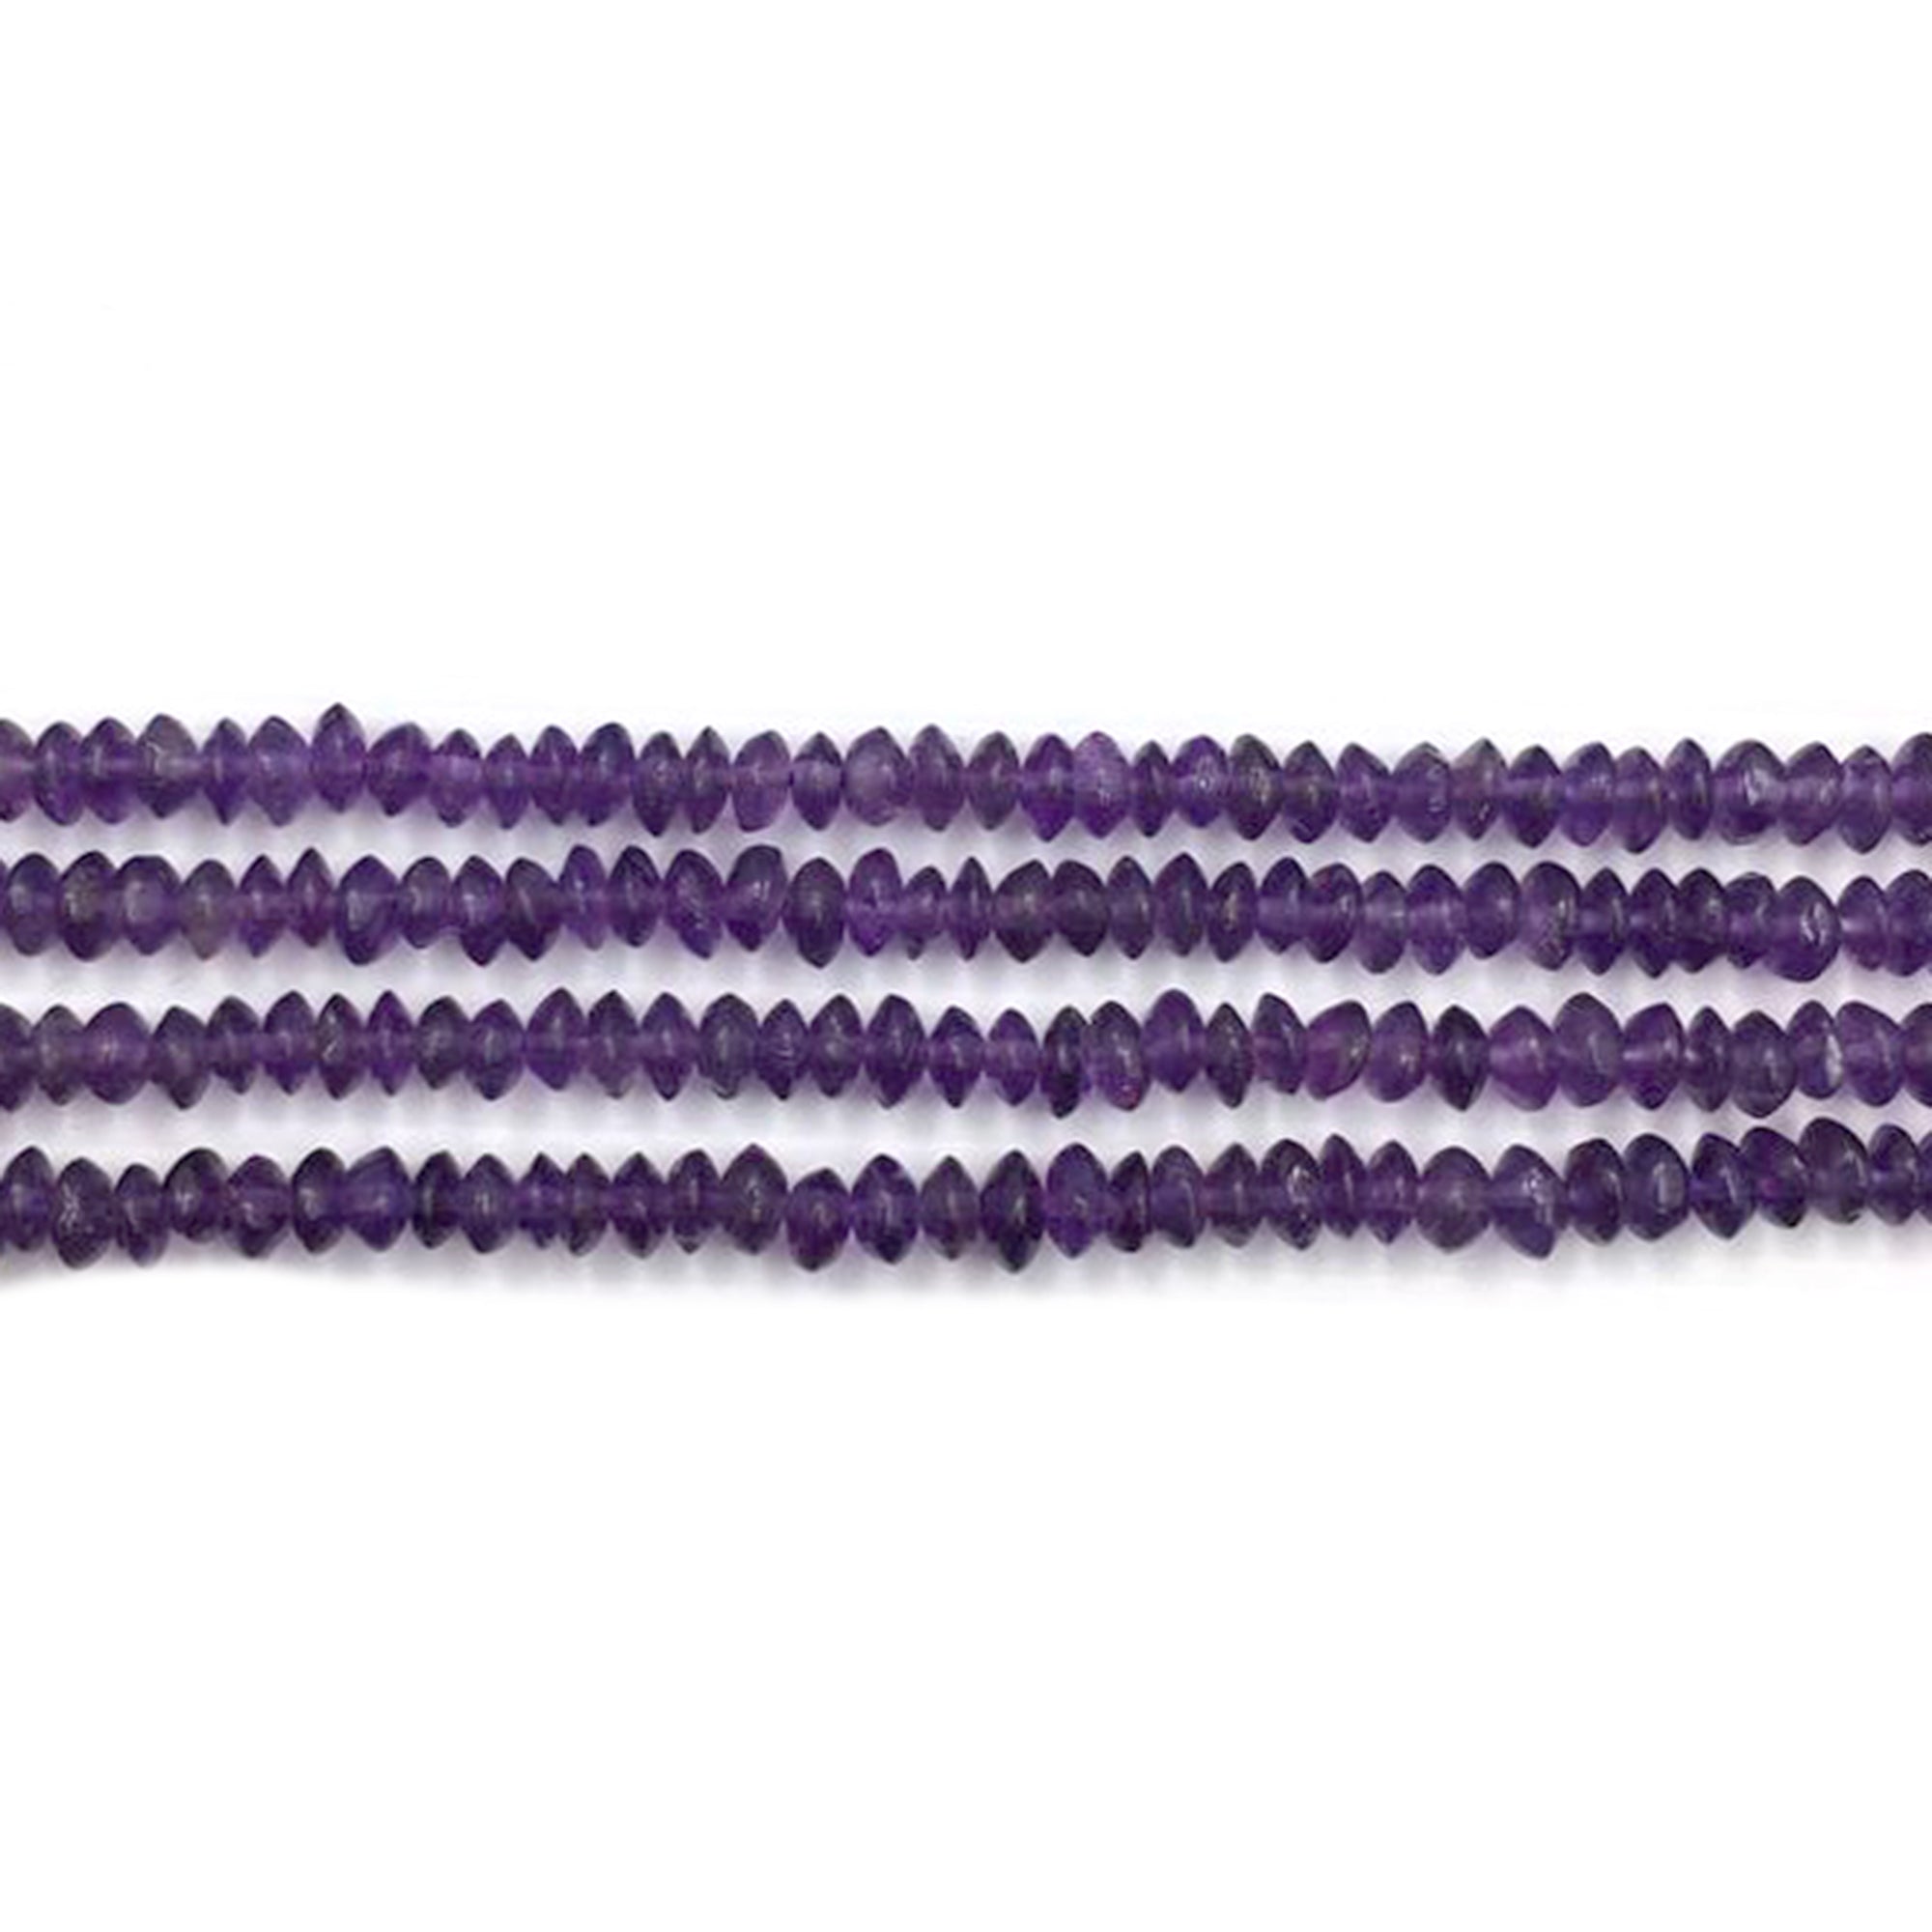 Lot of 2 Strand Dark African Amethyst 4 MM Faceted Rondelle Shape Beads Strand